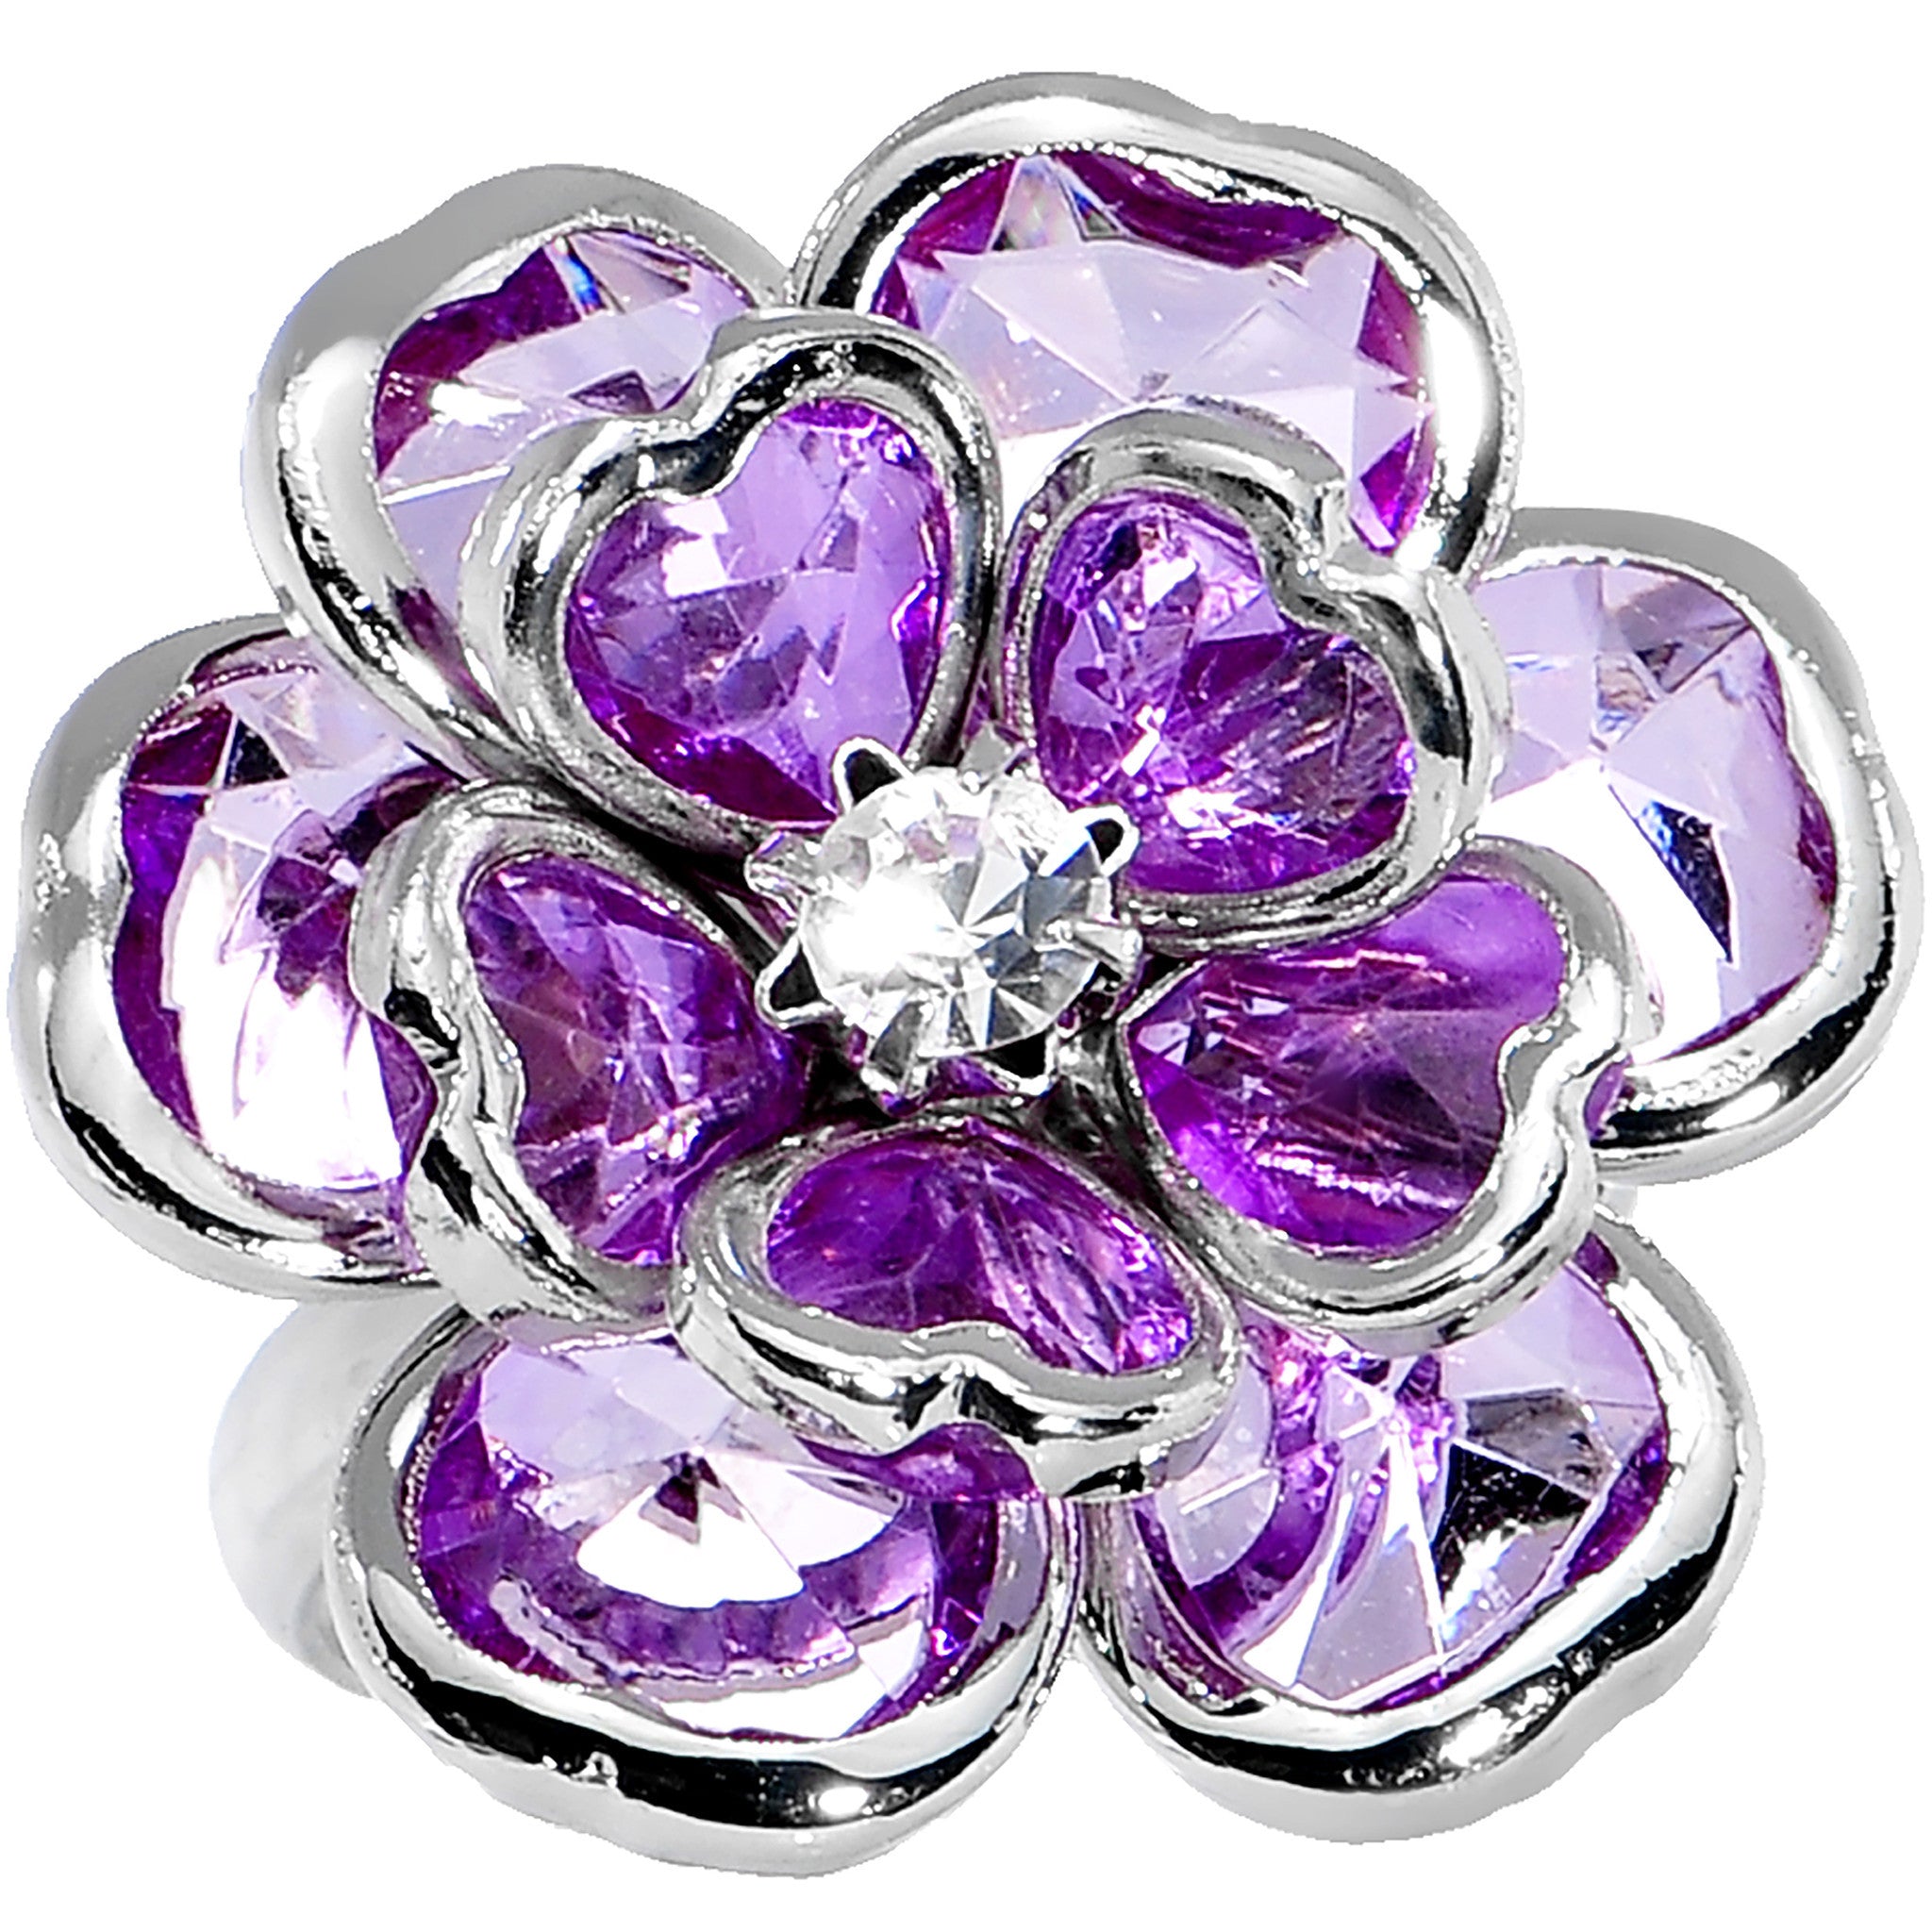 Small Purple Faceted Blooming Flower Adjustable Ring